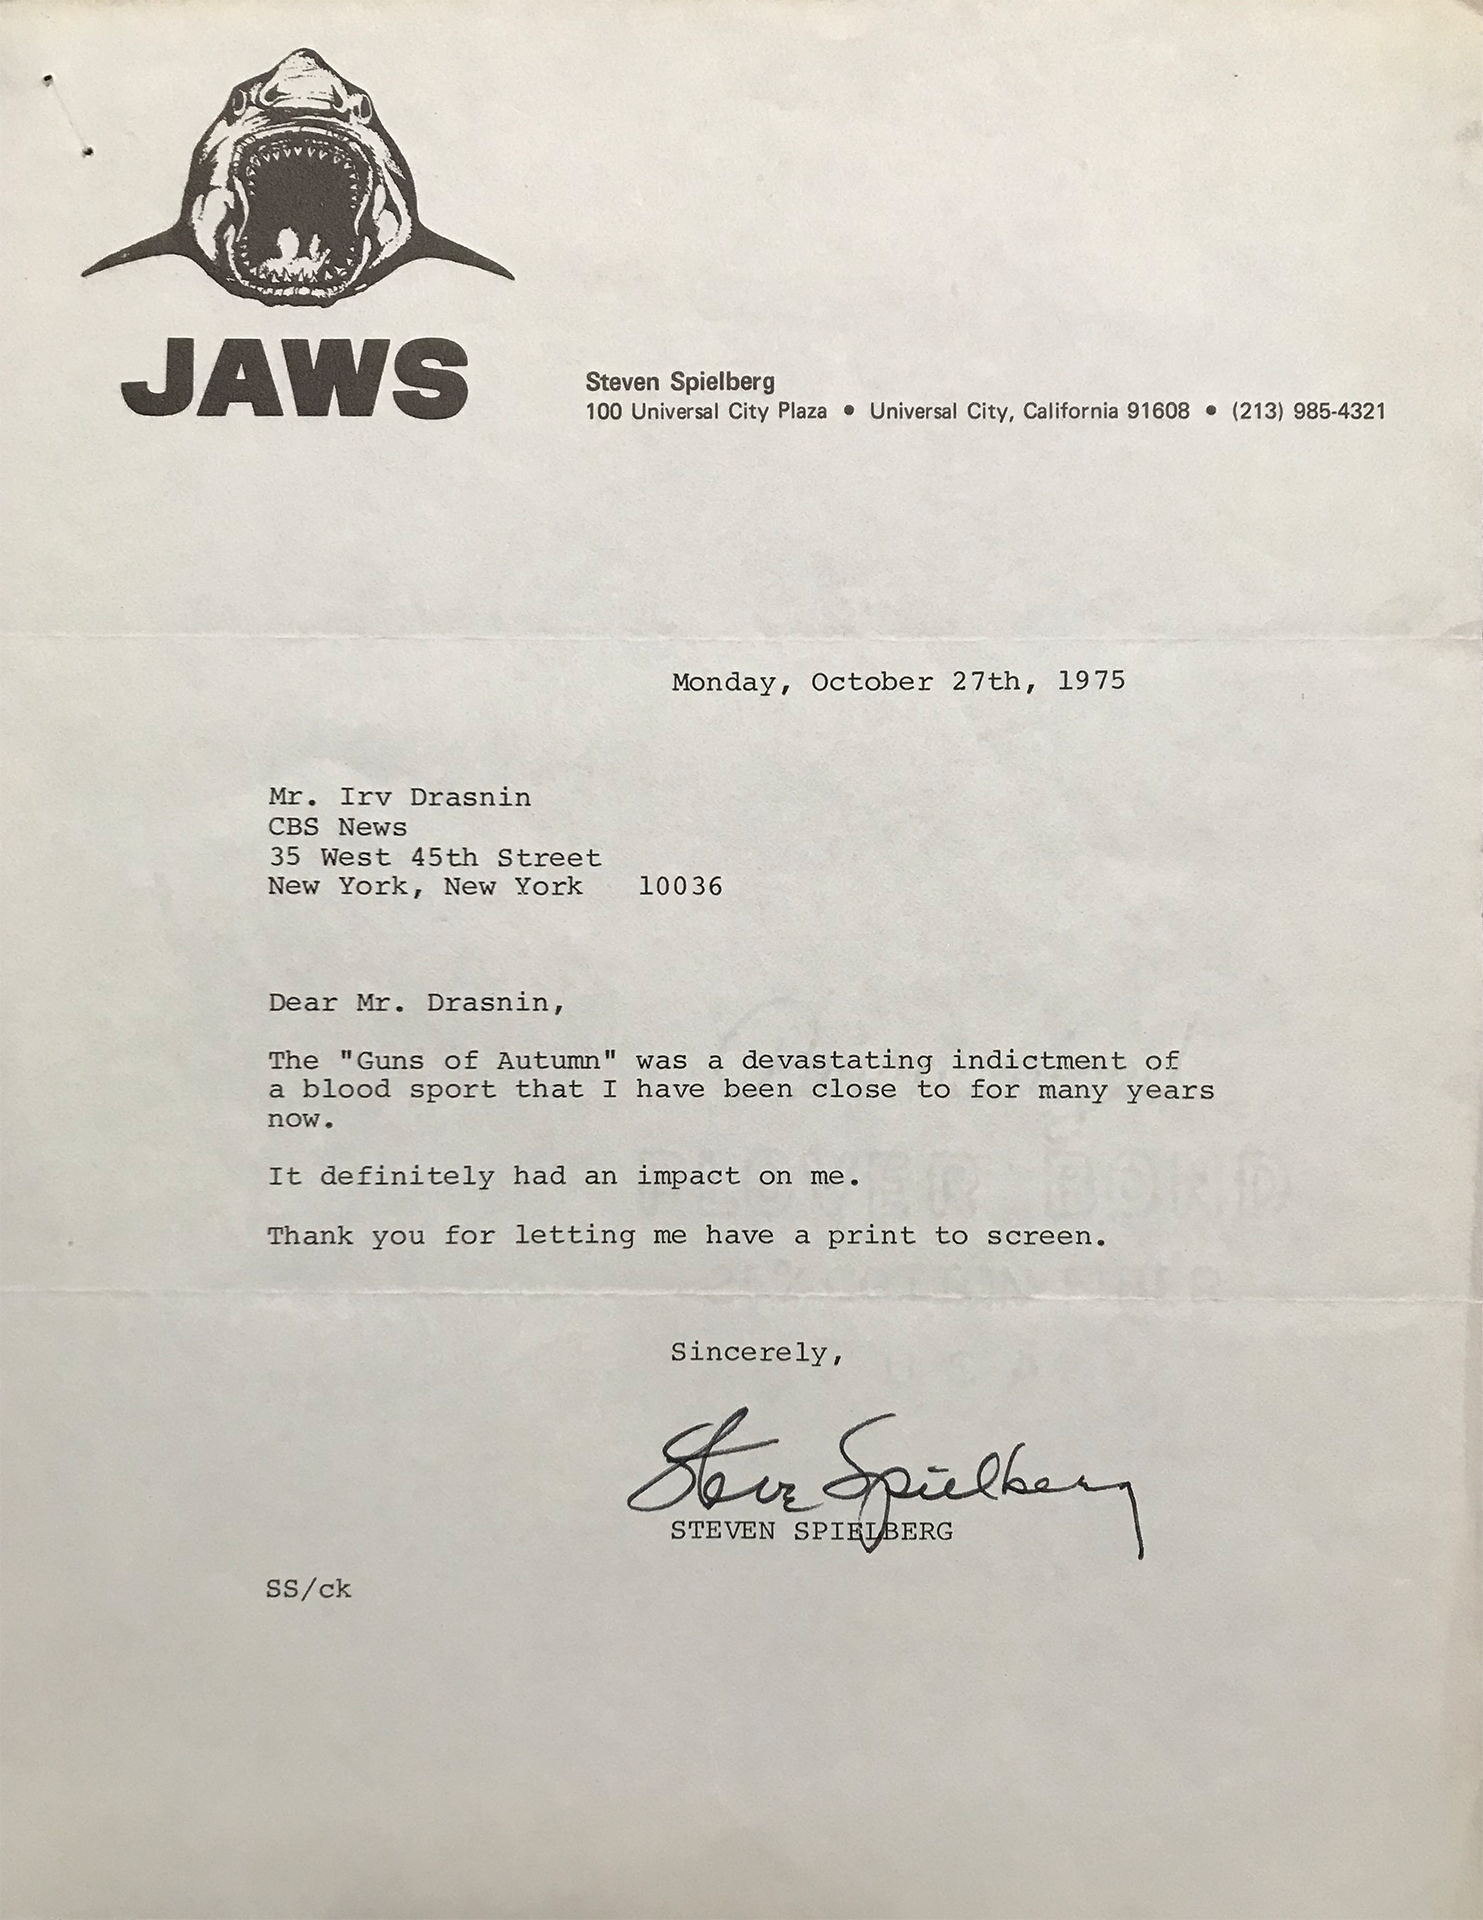 The Spielberg Letter